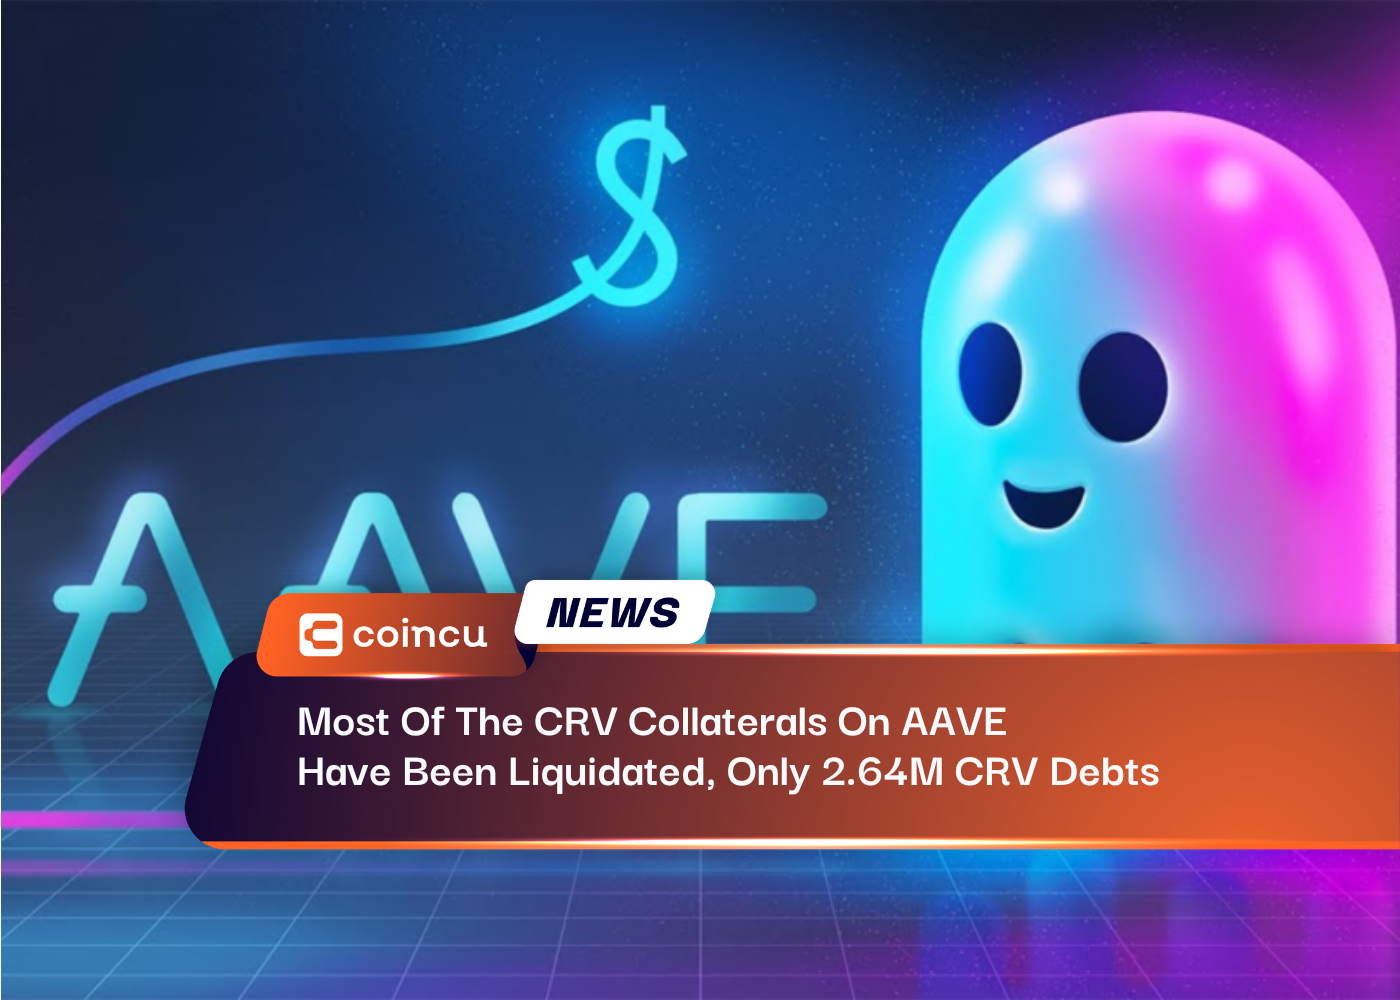 Most Of The CRV Collaterals On AAVE Have Been Liquidated, Only 2.64M CRV Debts